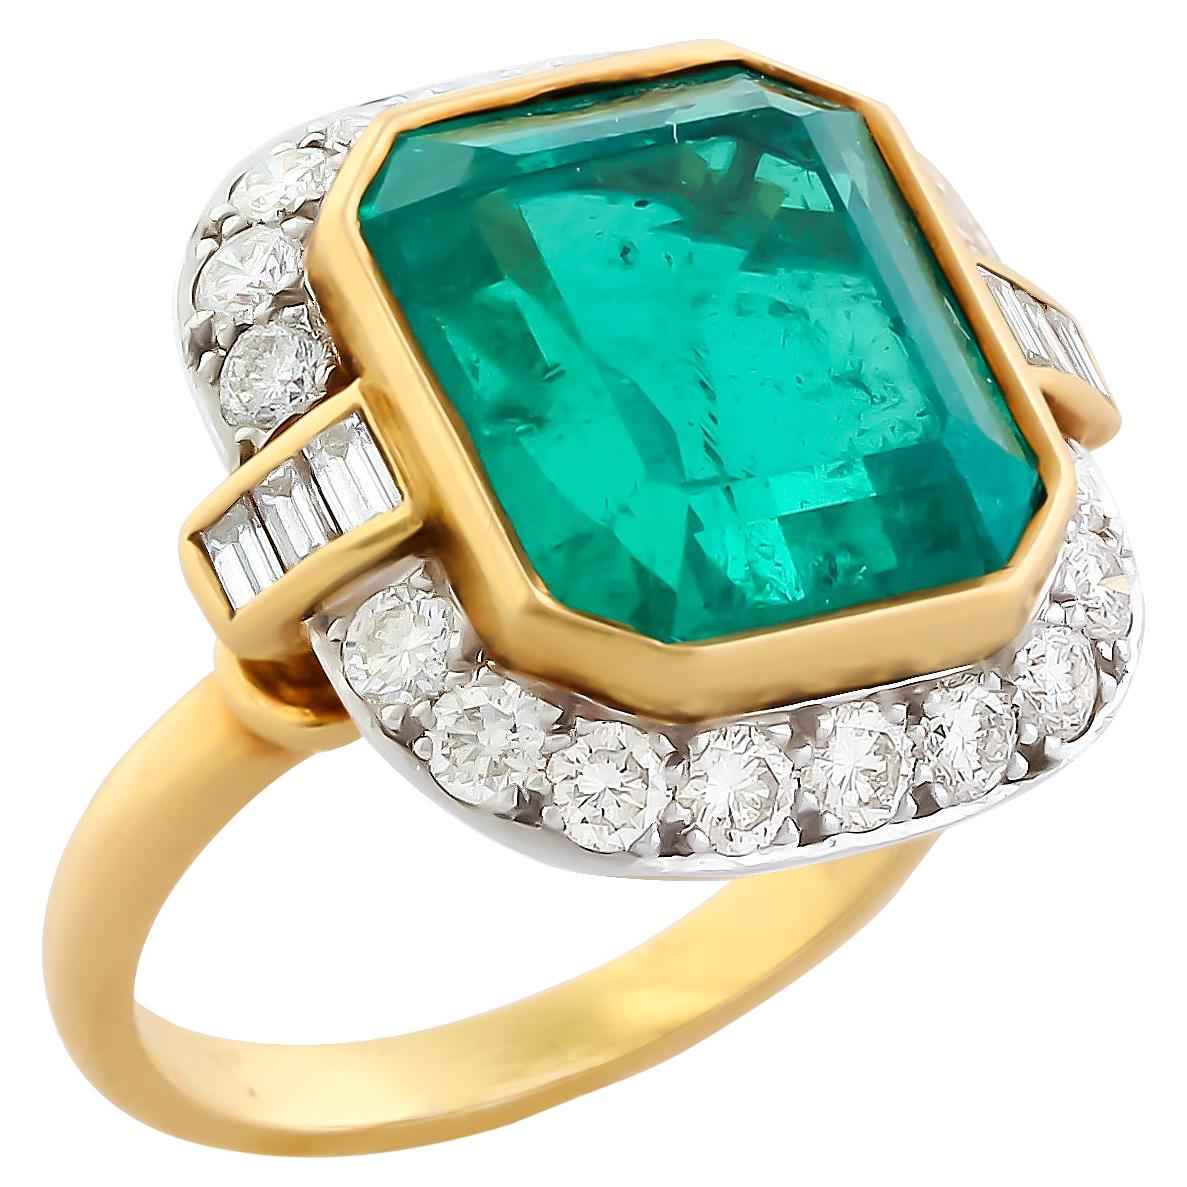 7.20 Carat Colombian Emerald Ring